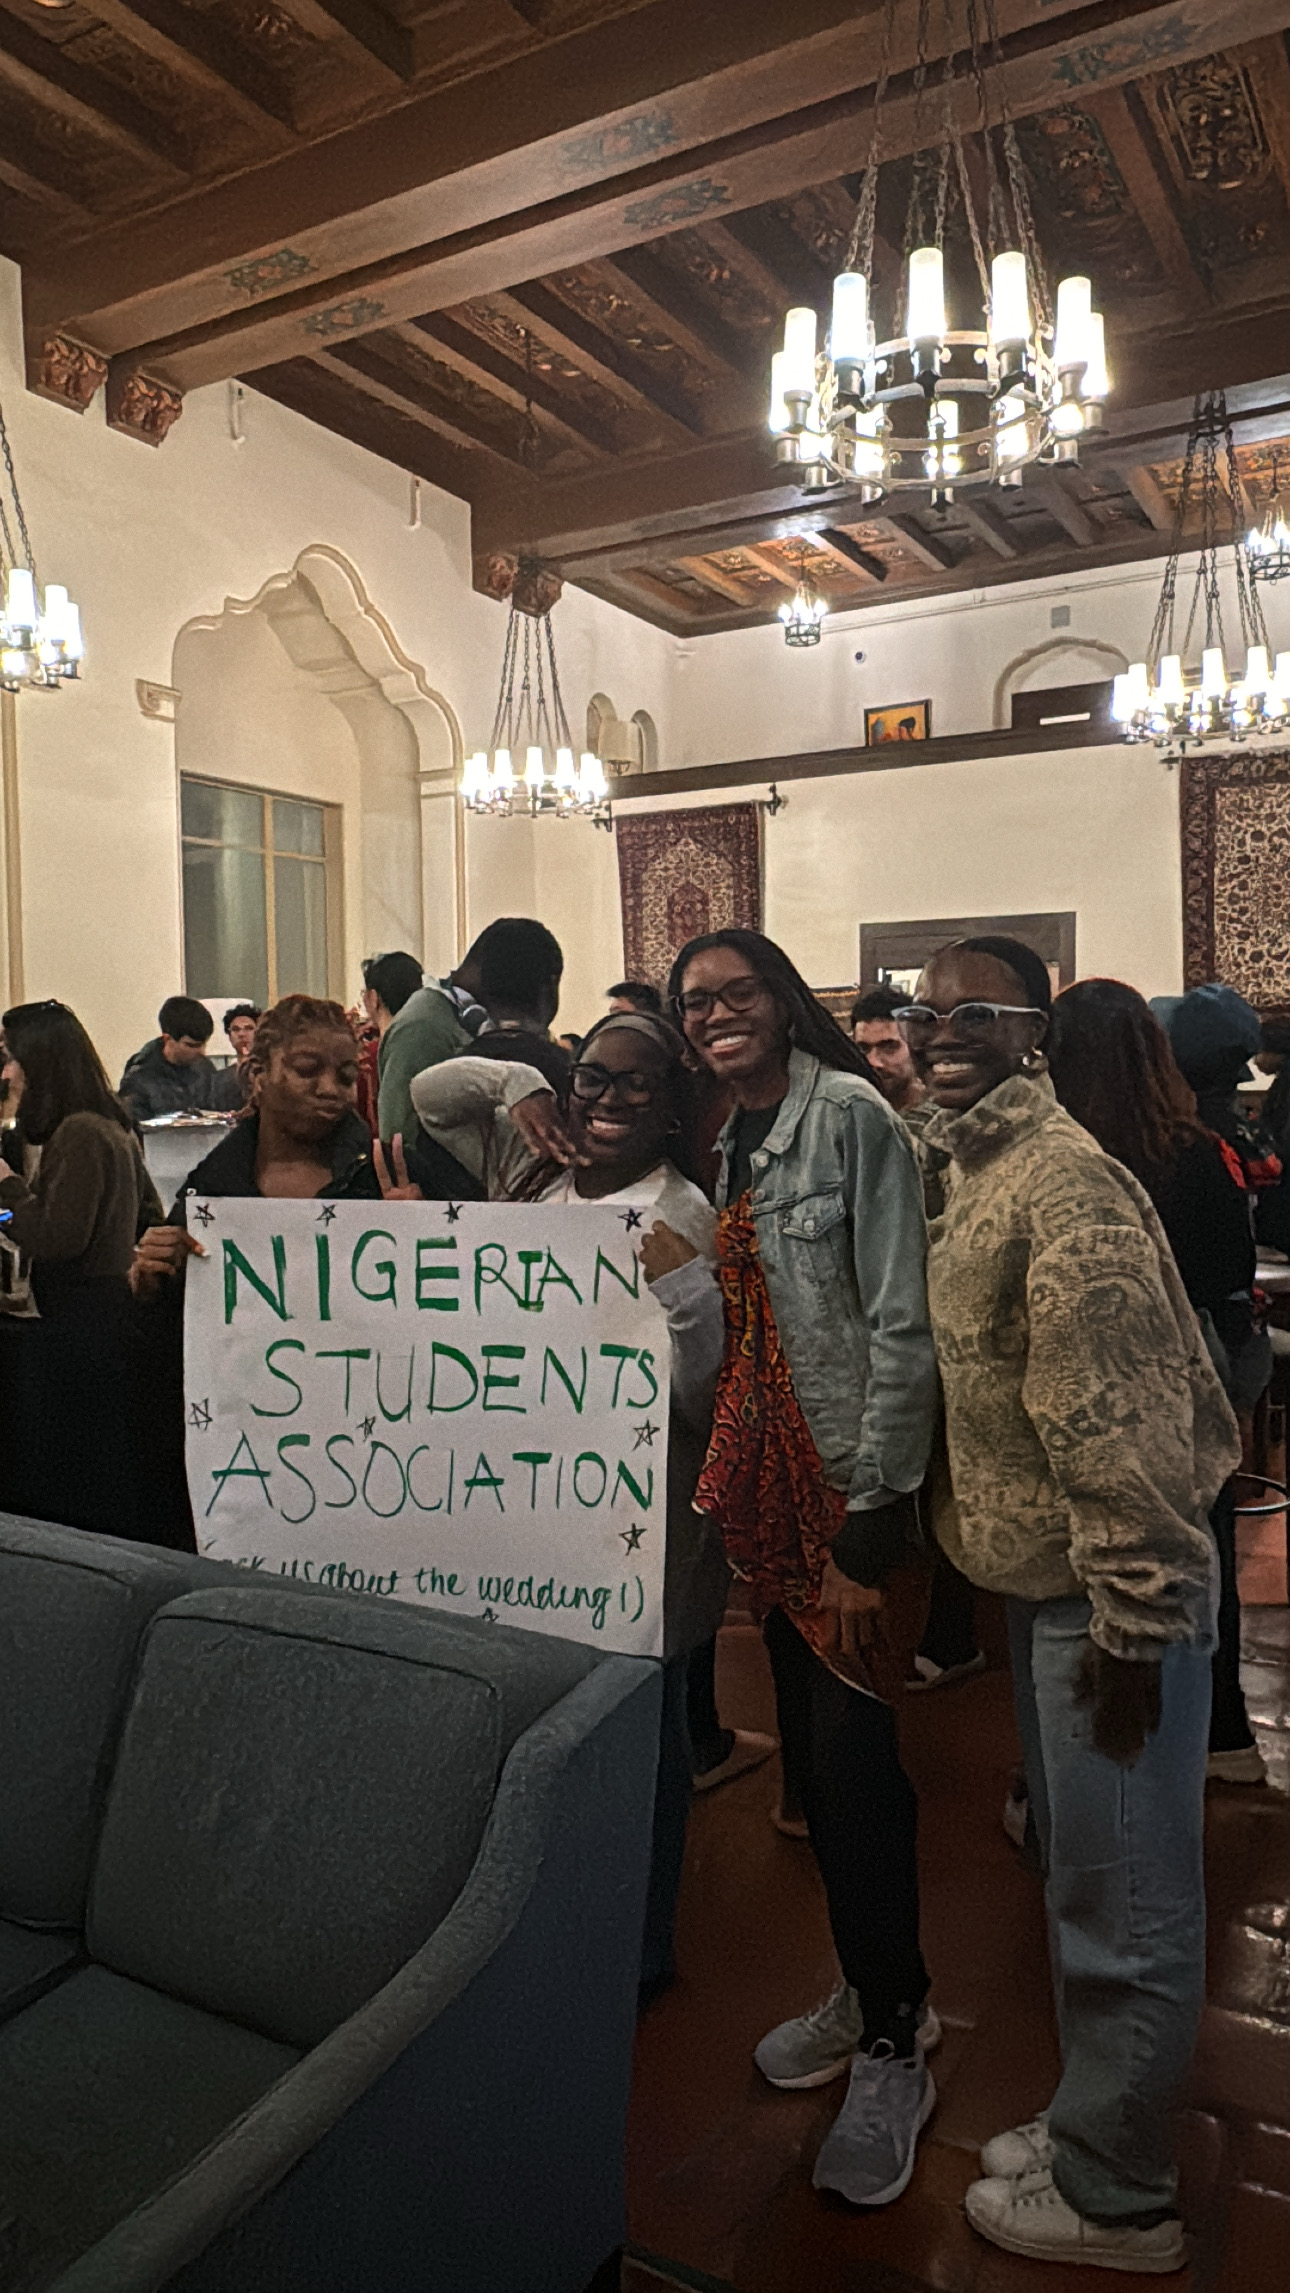 A group photo of the Nigerian Students Association.